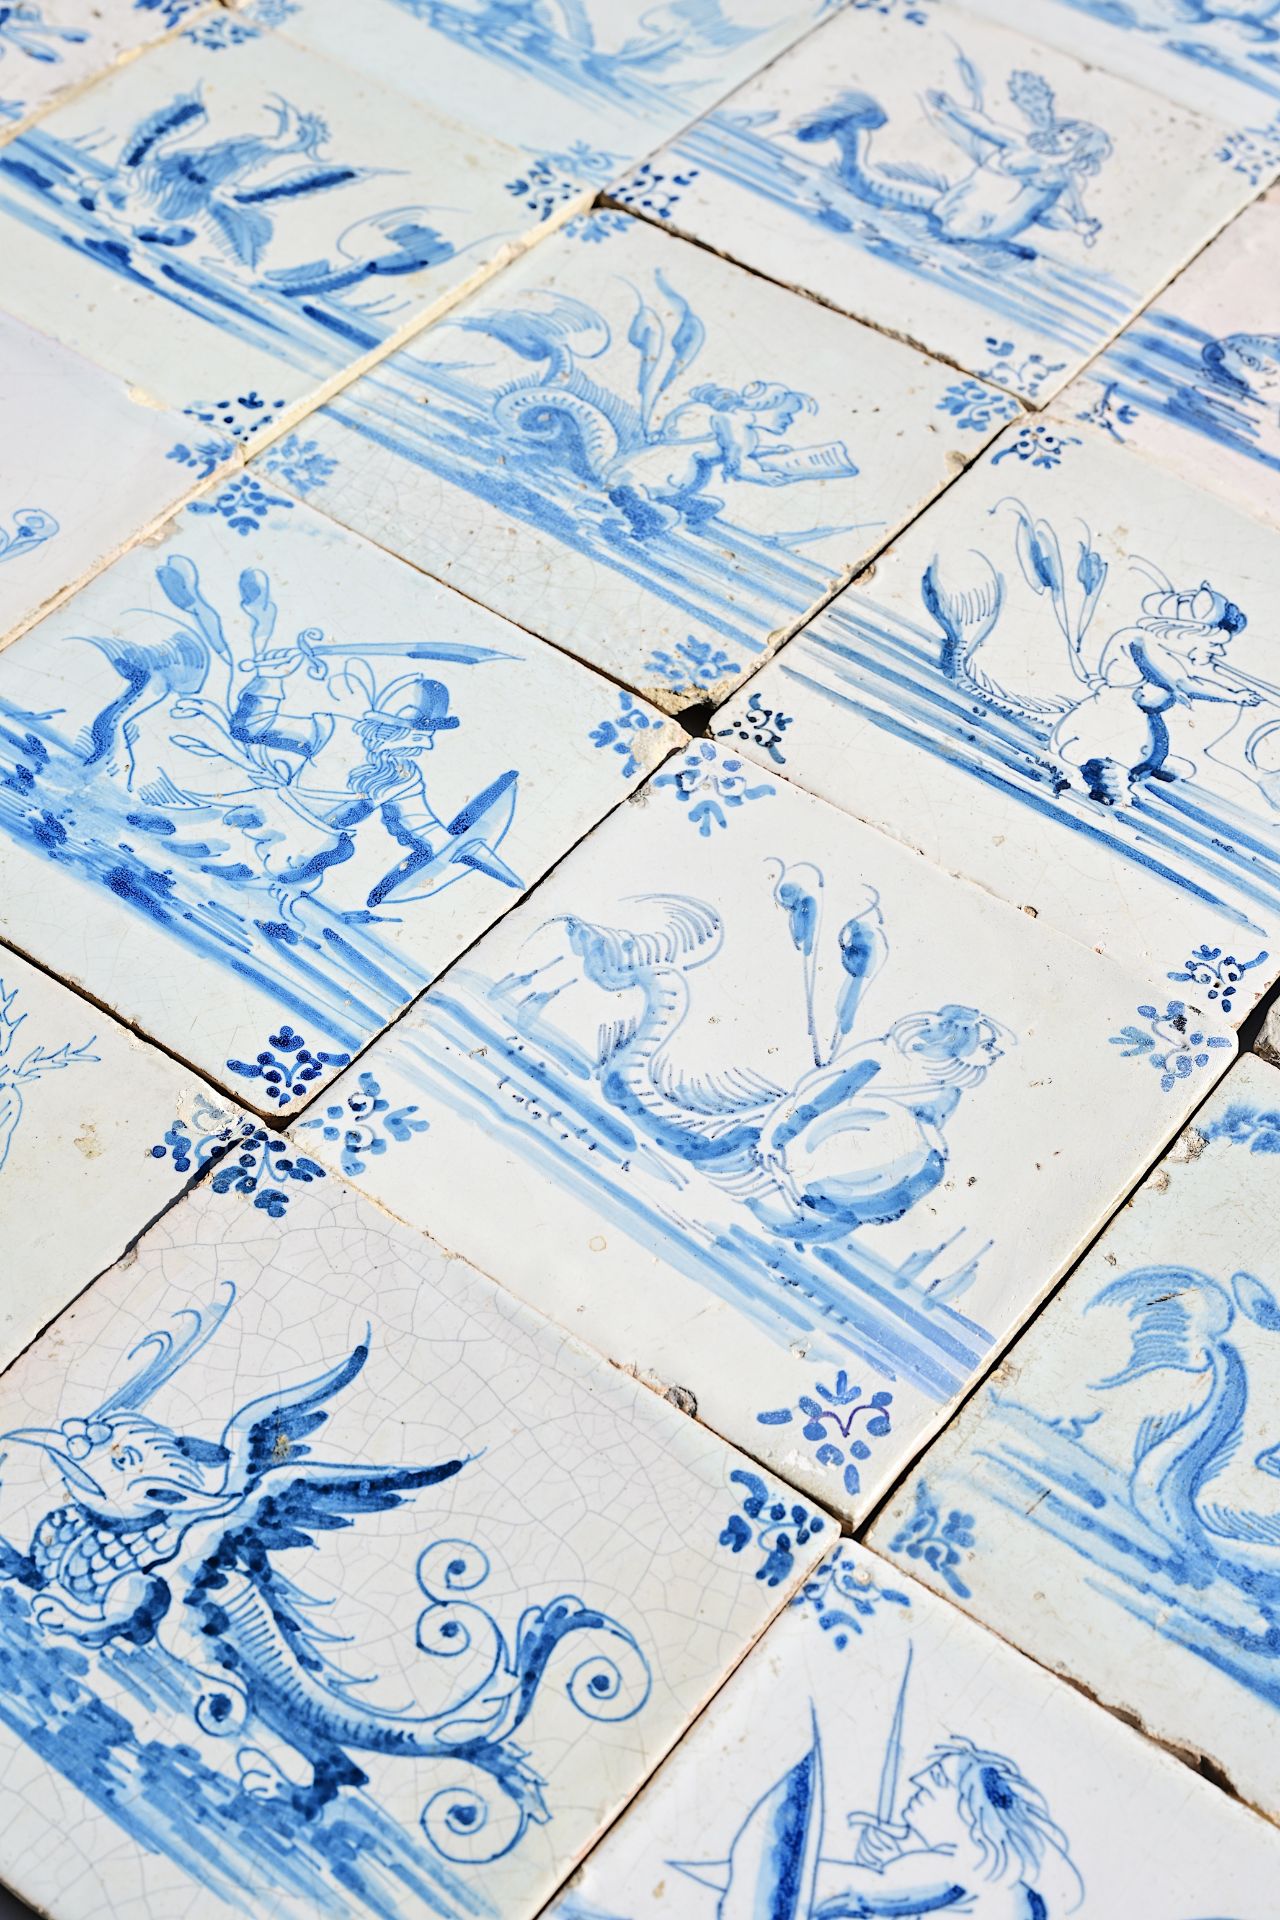 Thirty Dutch Delft blue and white 'sea monster' tiles, 17th C. - Image 3 of 3